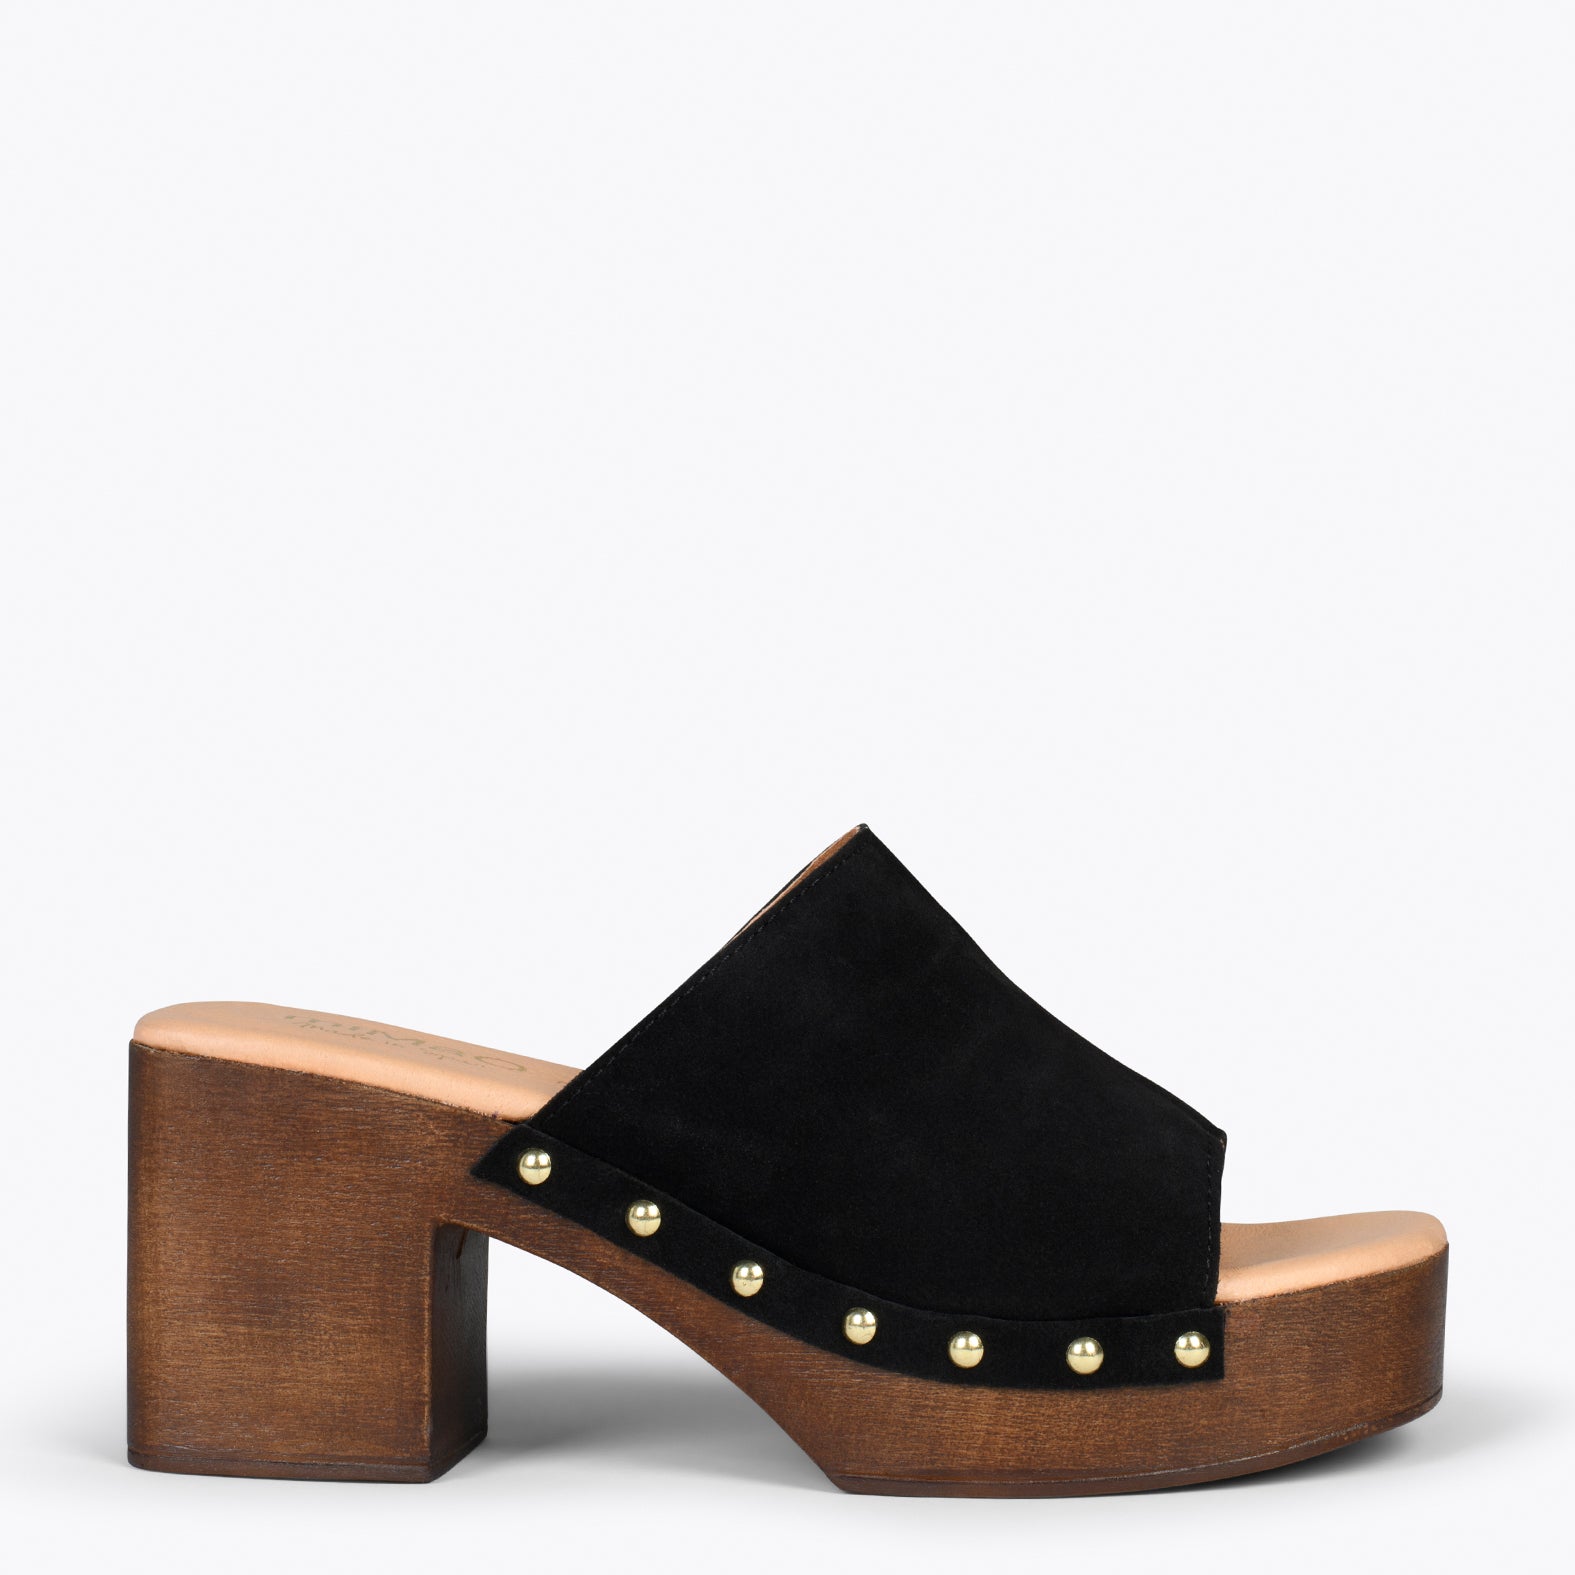 HOLIDAY – BLACK mules with heel and platform